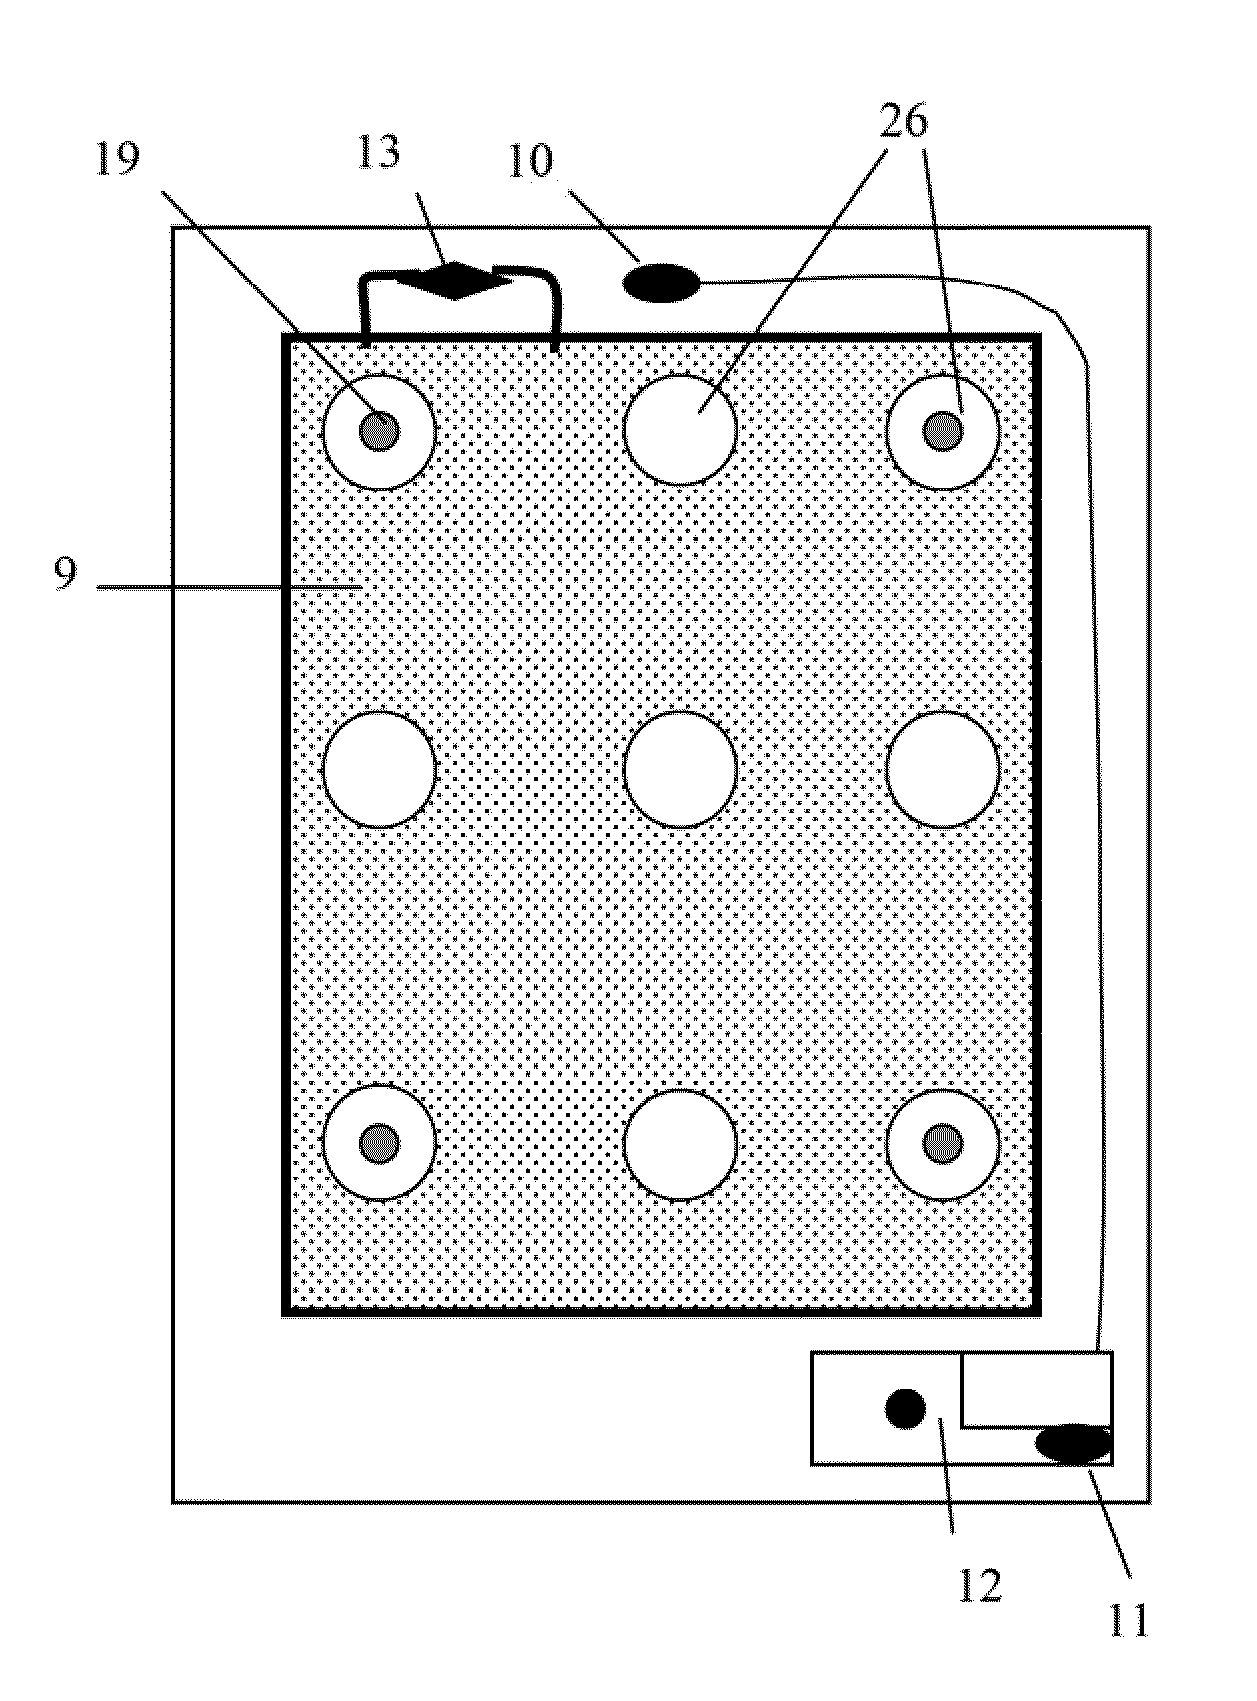 Radiant System for Heat Transfer